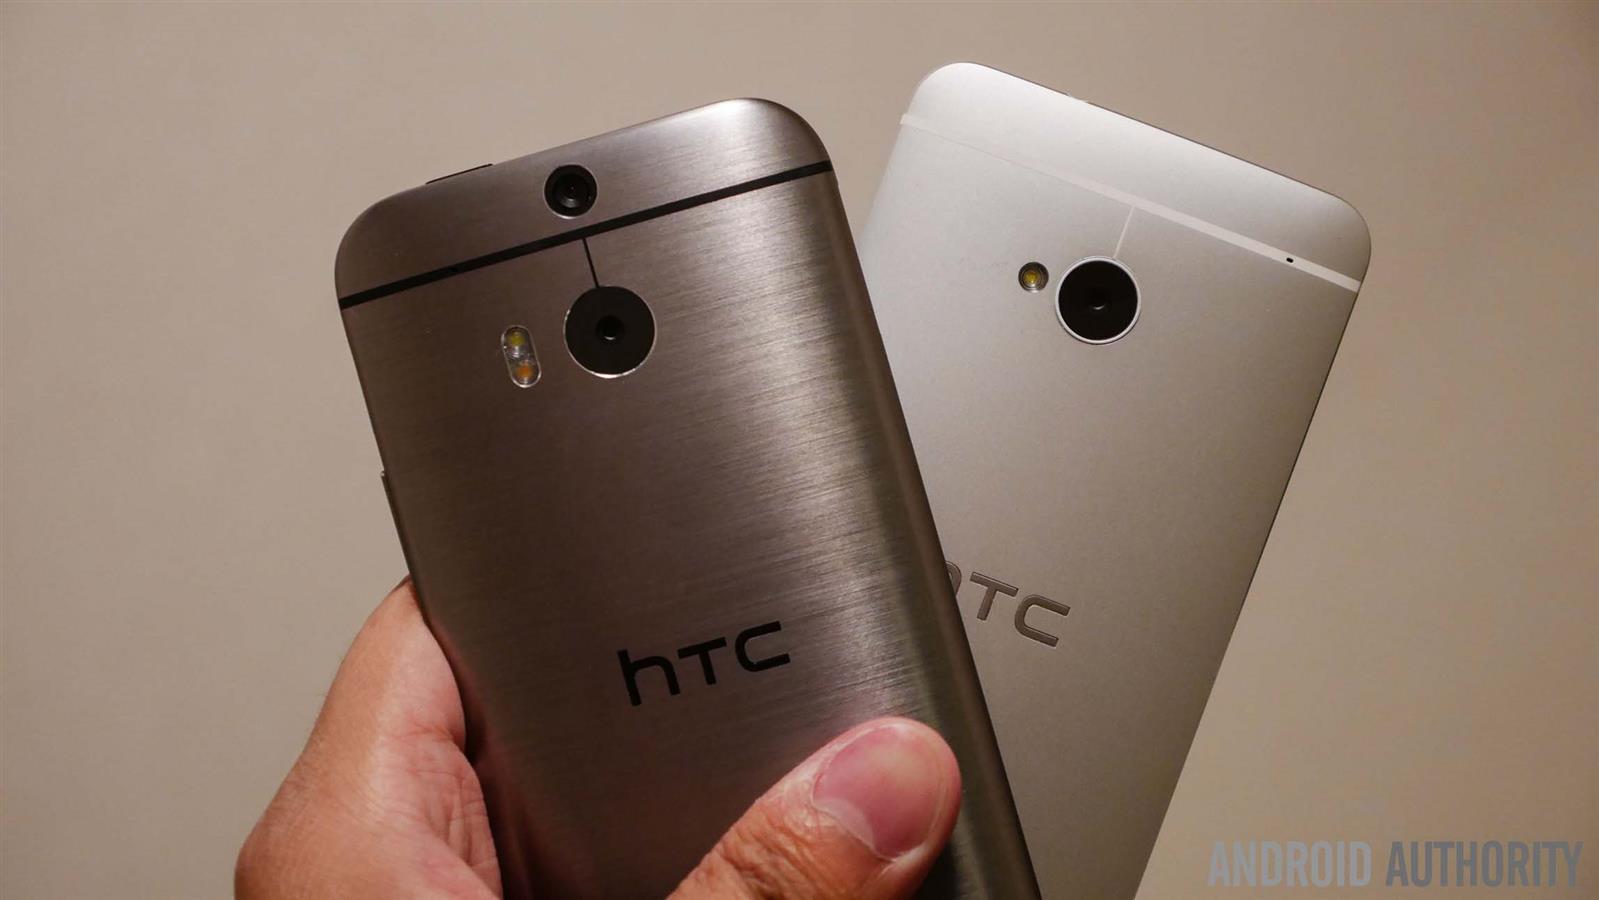 htc-one-m8-vs-htc-one-m7-quick-look-aa-15-of-191